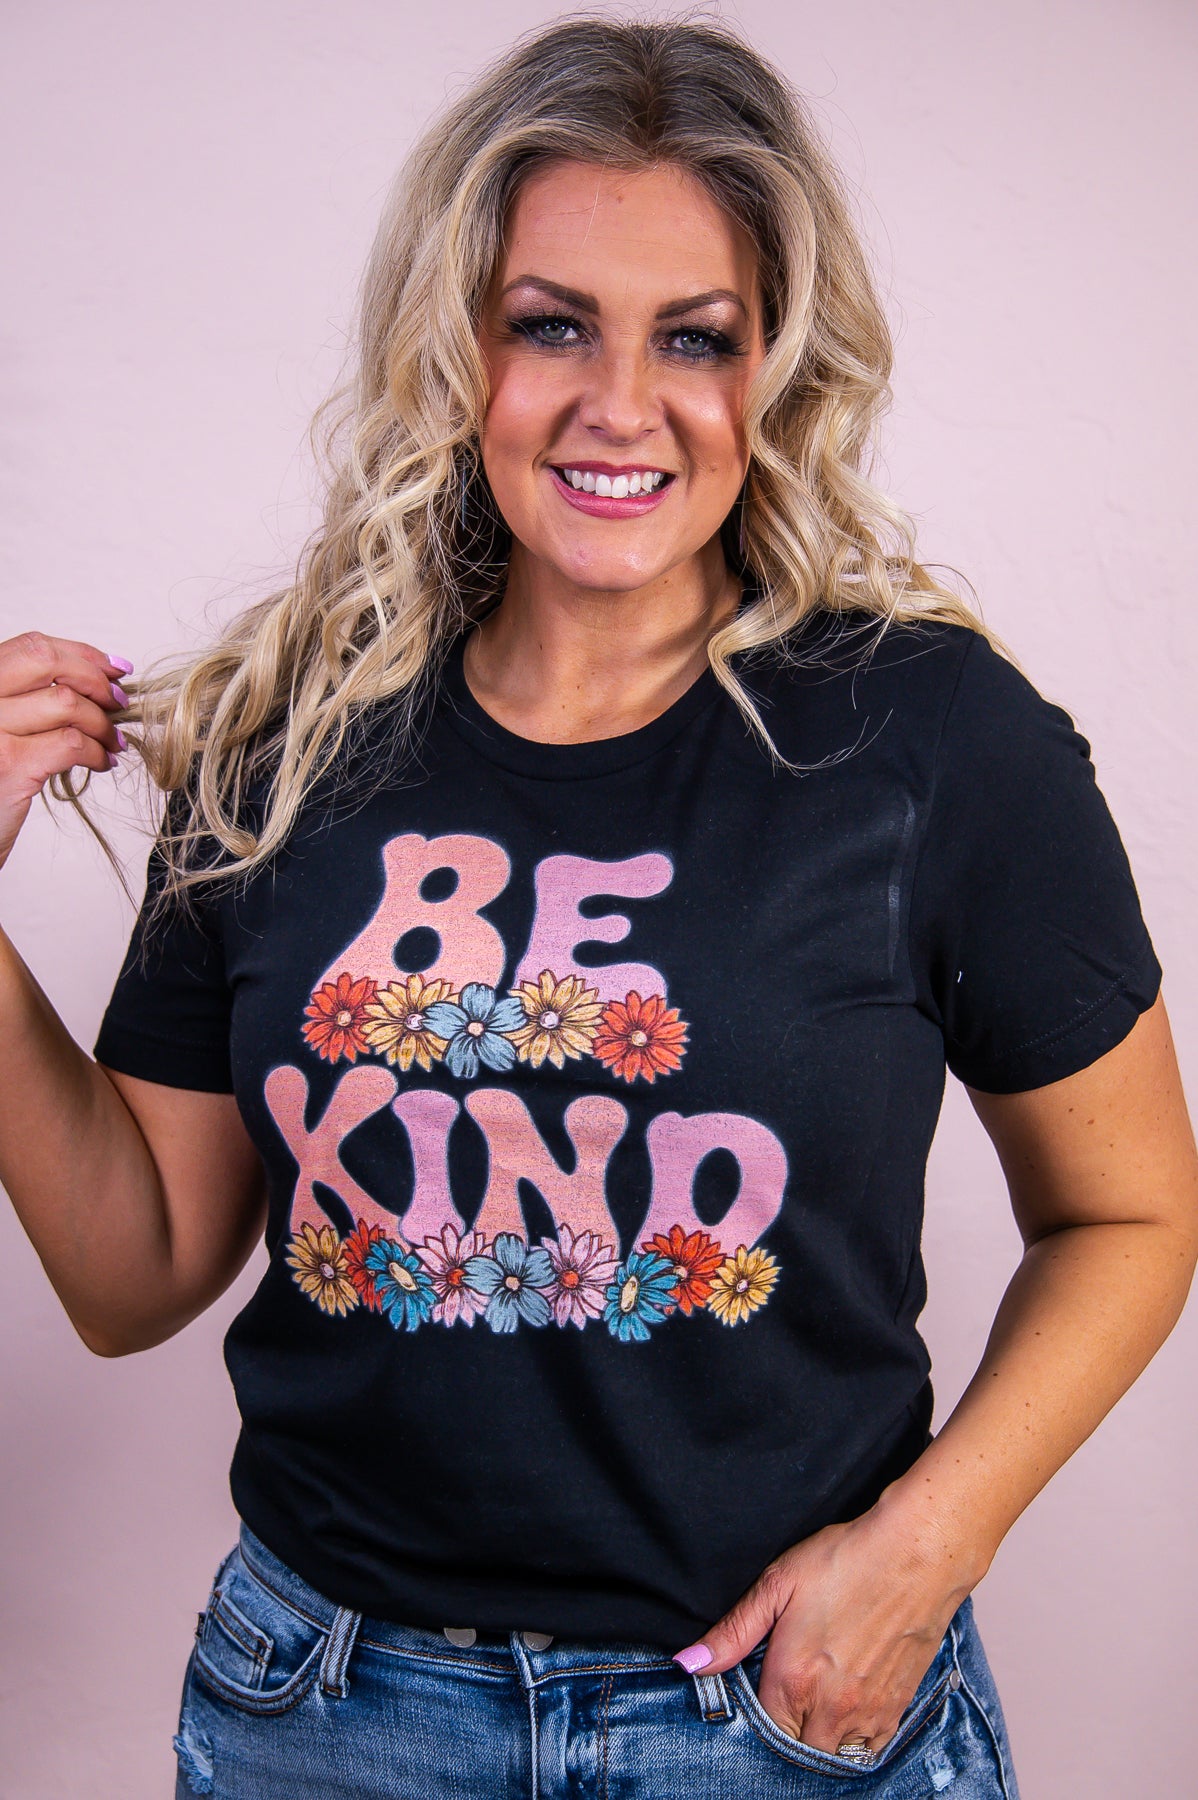 Be Kind Black Graphic Tee - A3261BK